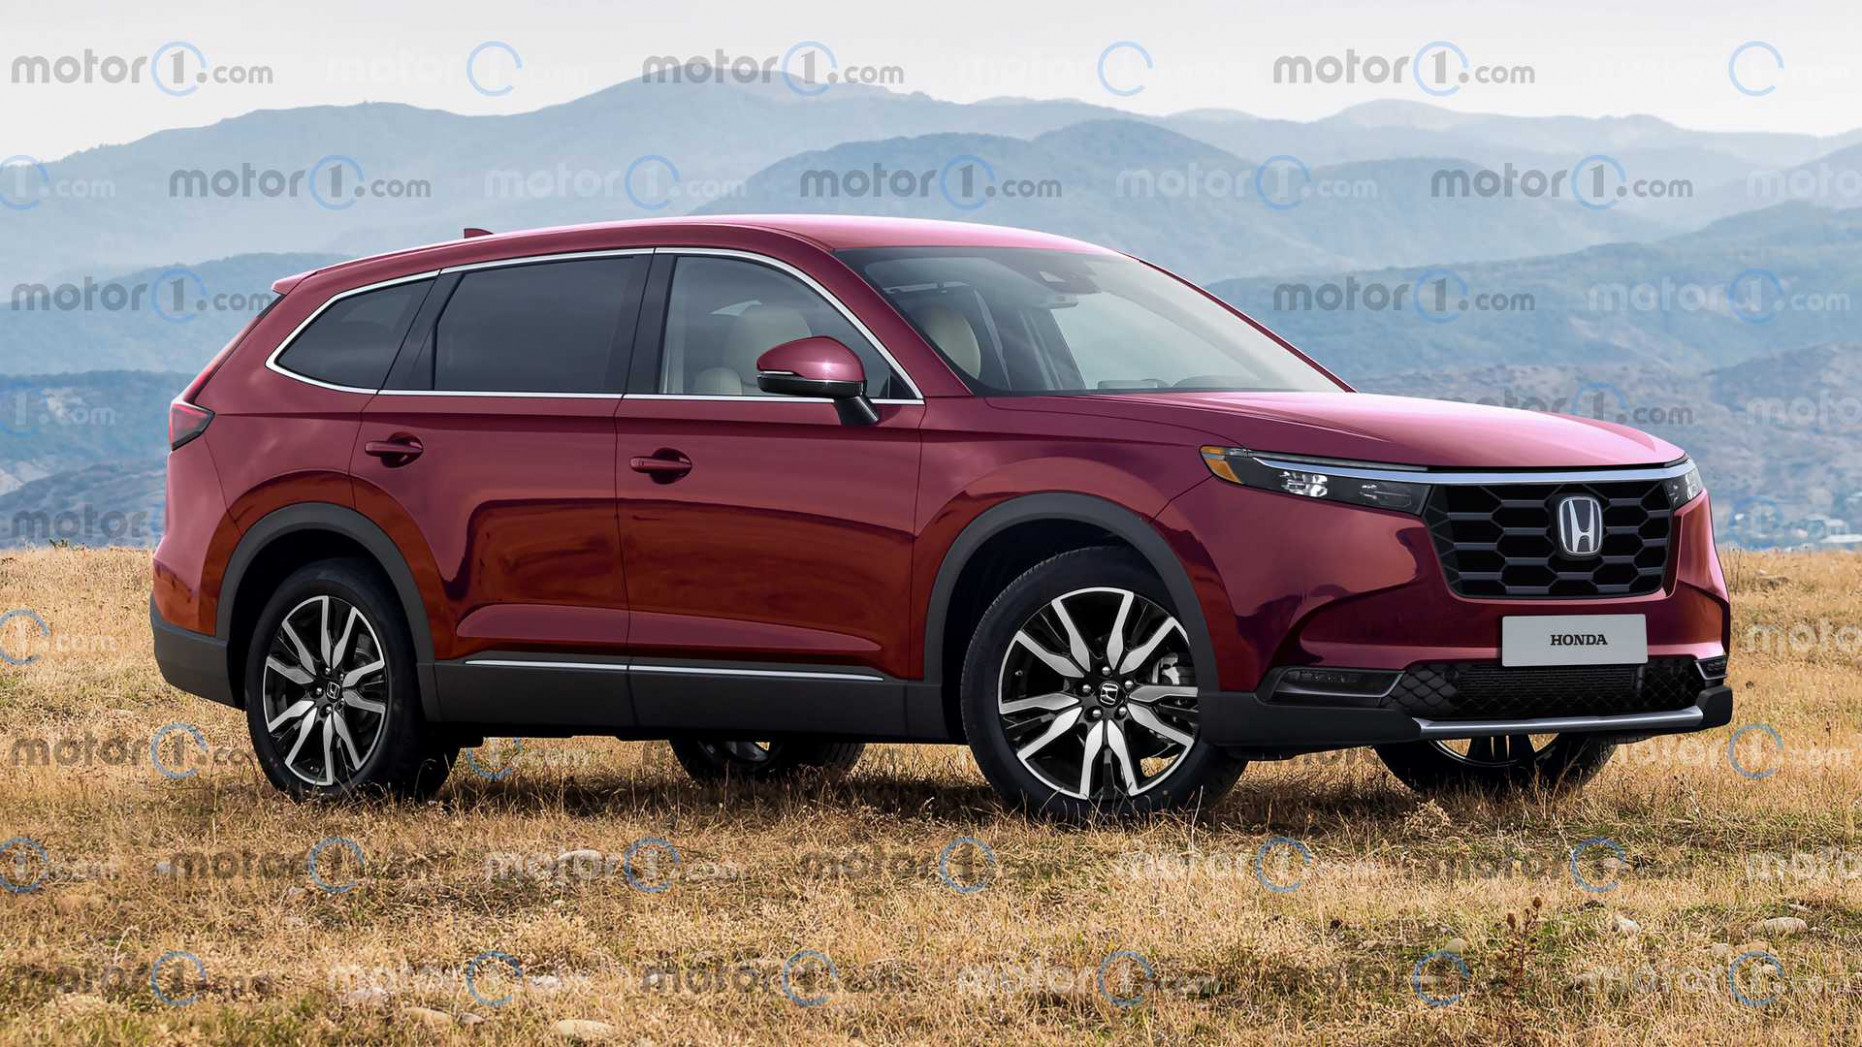 Prices When Will 2023 Honda Crv Be Released